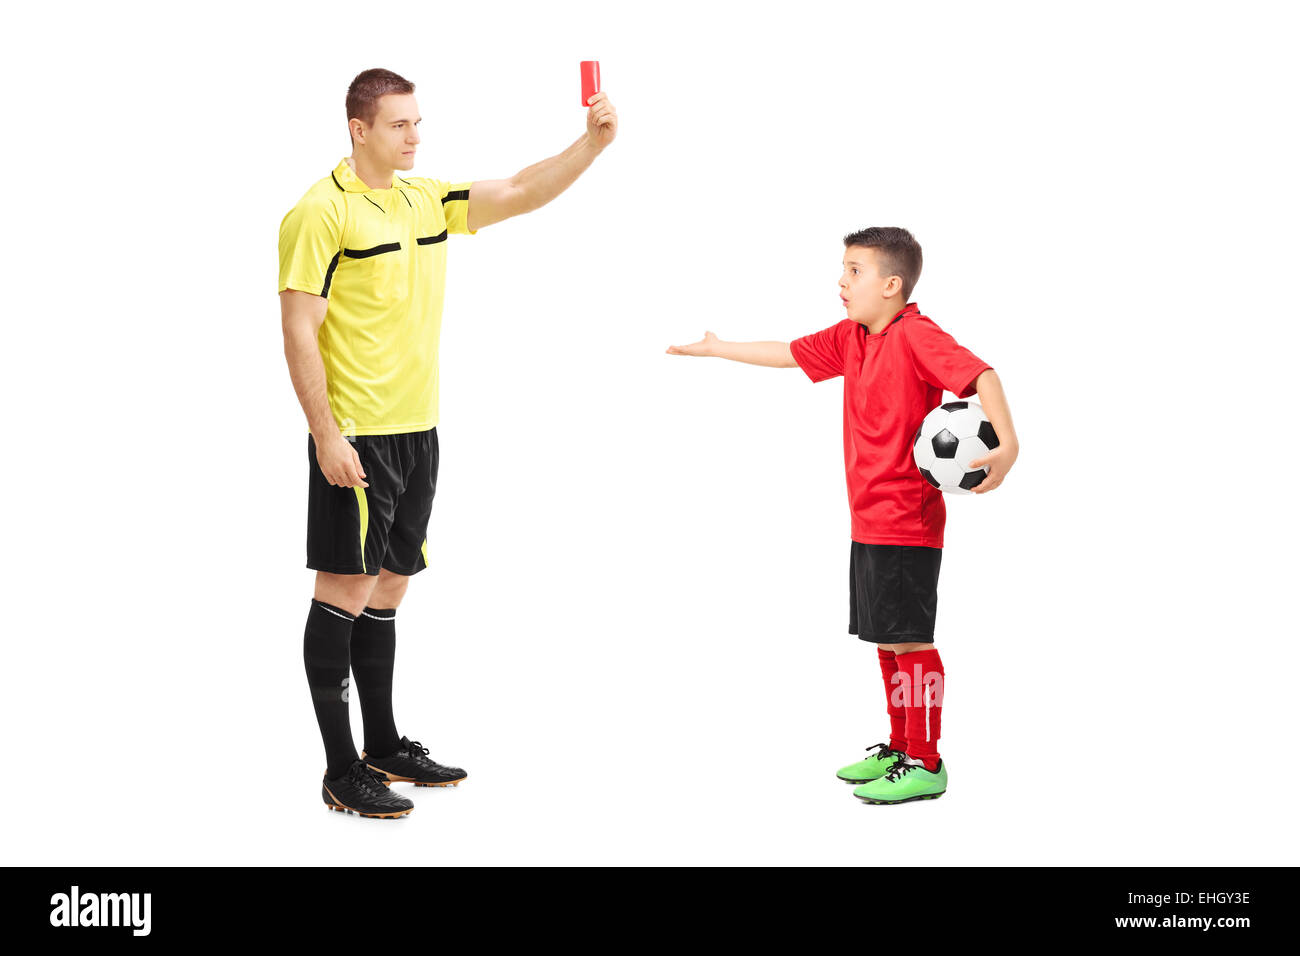 Football referee showing red card to a junior soccer player isolated on white background Stock Photo